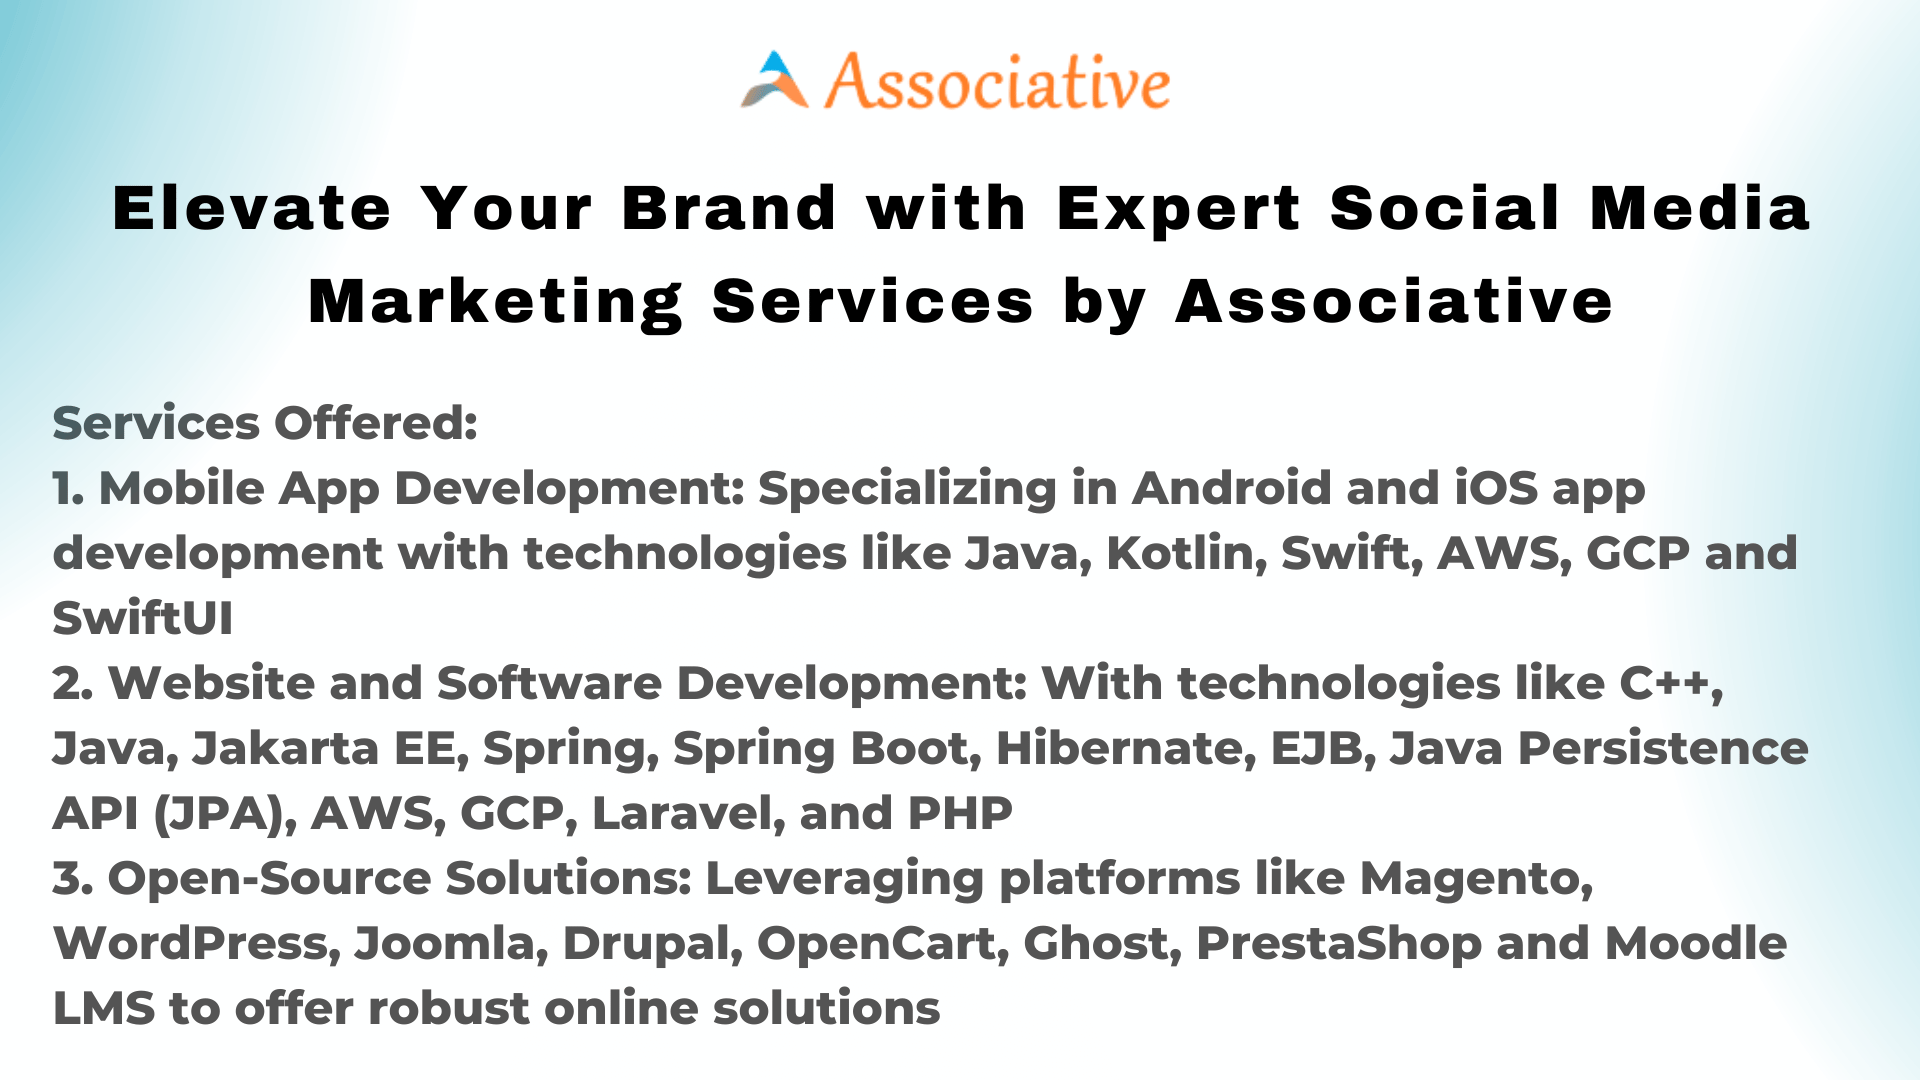 Elevate Your Brand with Expert Social Media Marketing Services by Associative